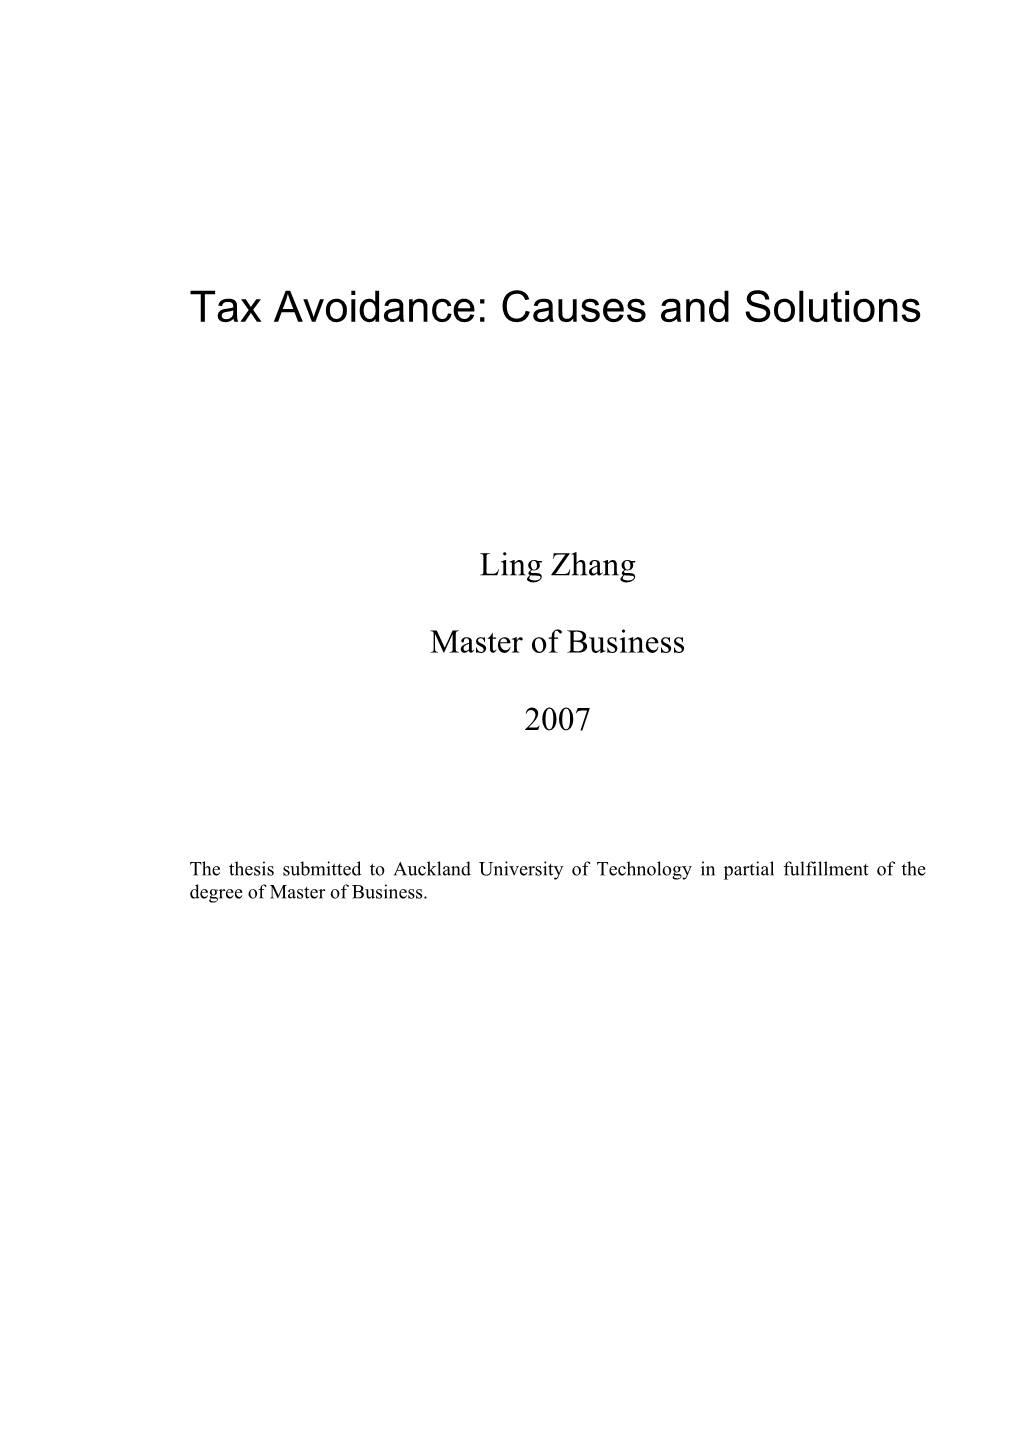 Tax Avoidance: Causes and Solutions